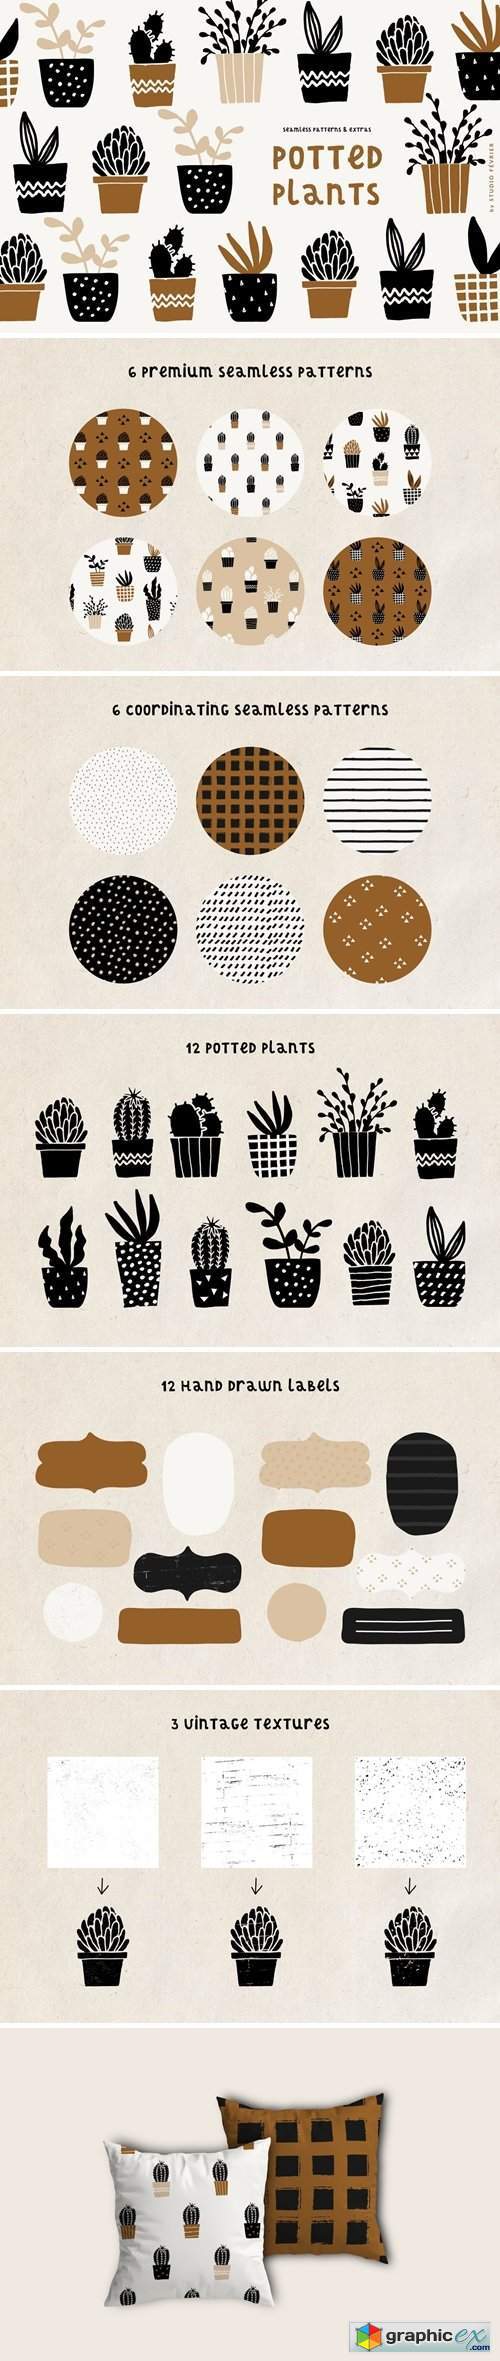 Potted Plants | Patterns & Extras